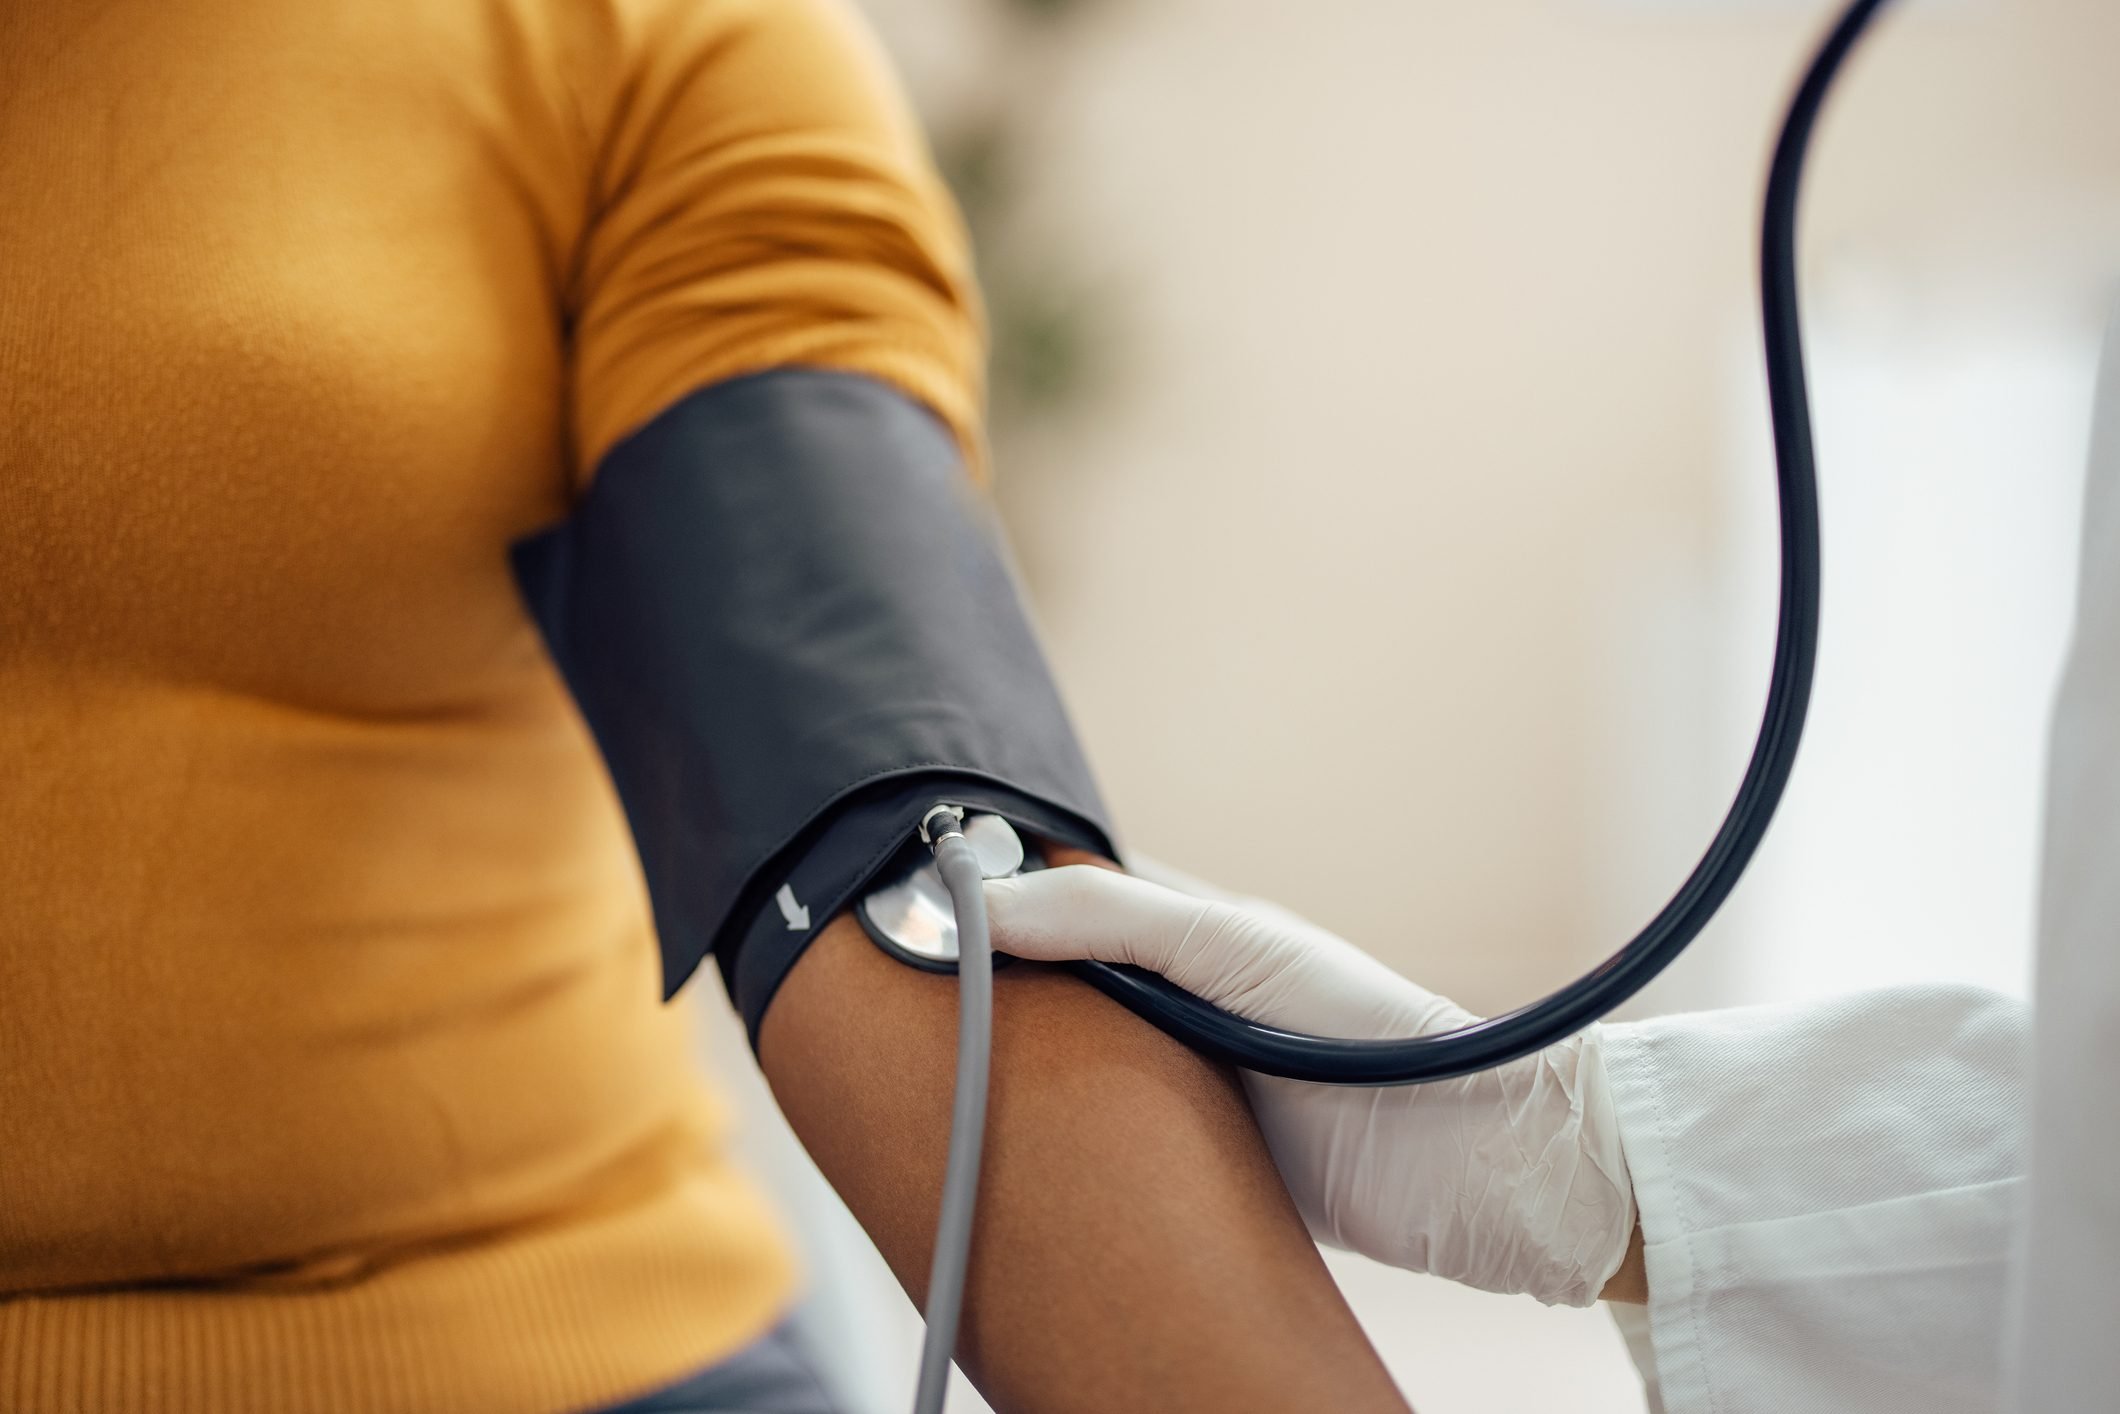 This Is the Ideal Blood Pressure That Prevents Heart Disease, Says New Study